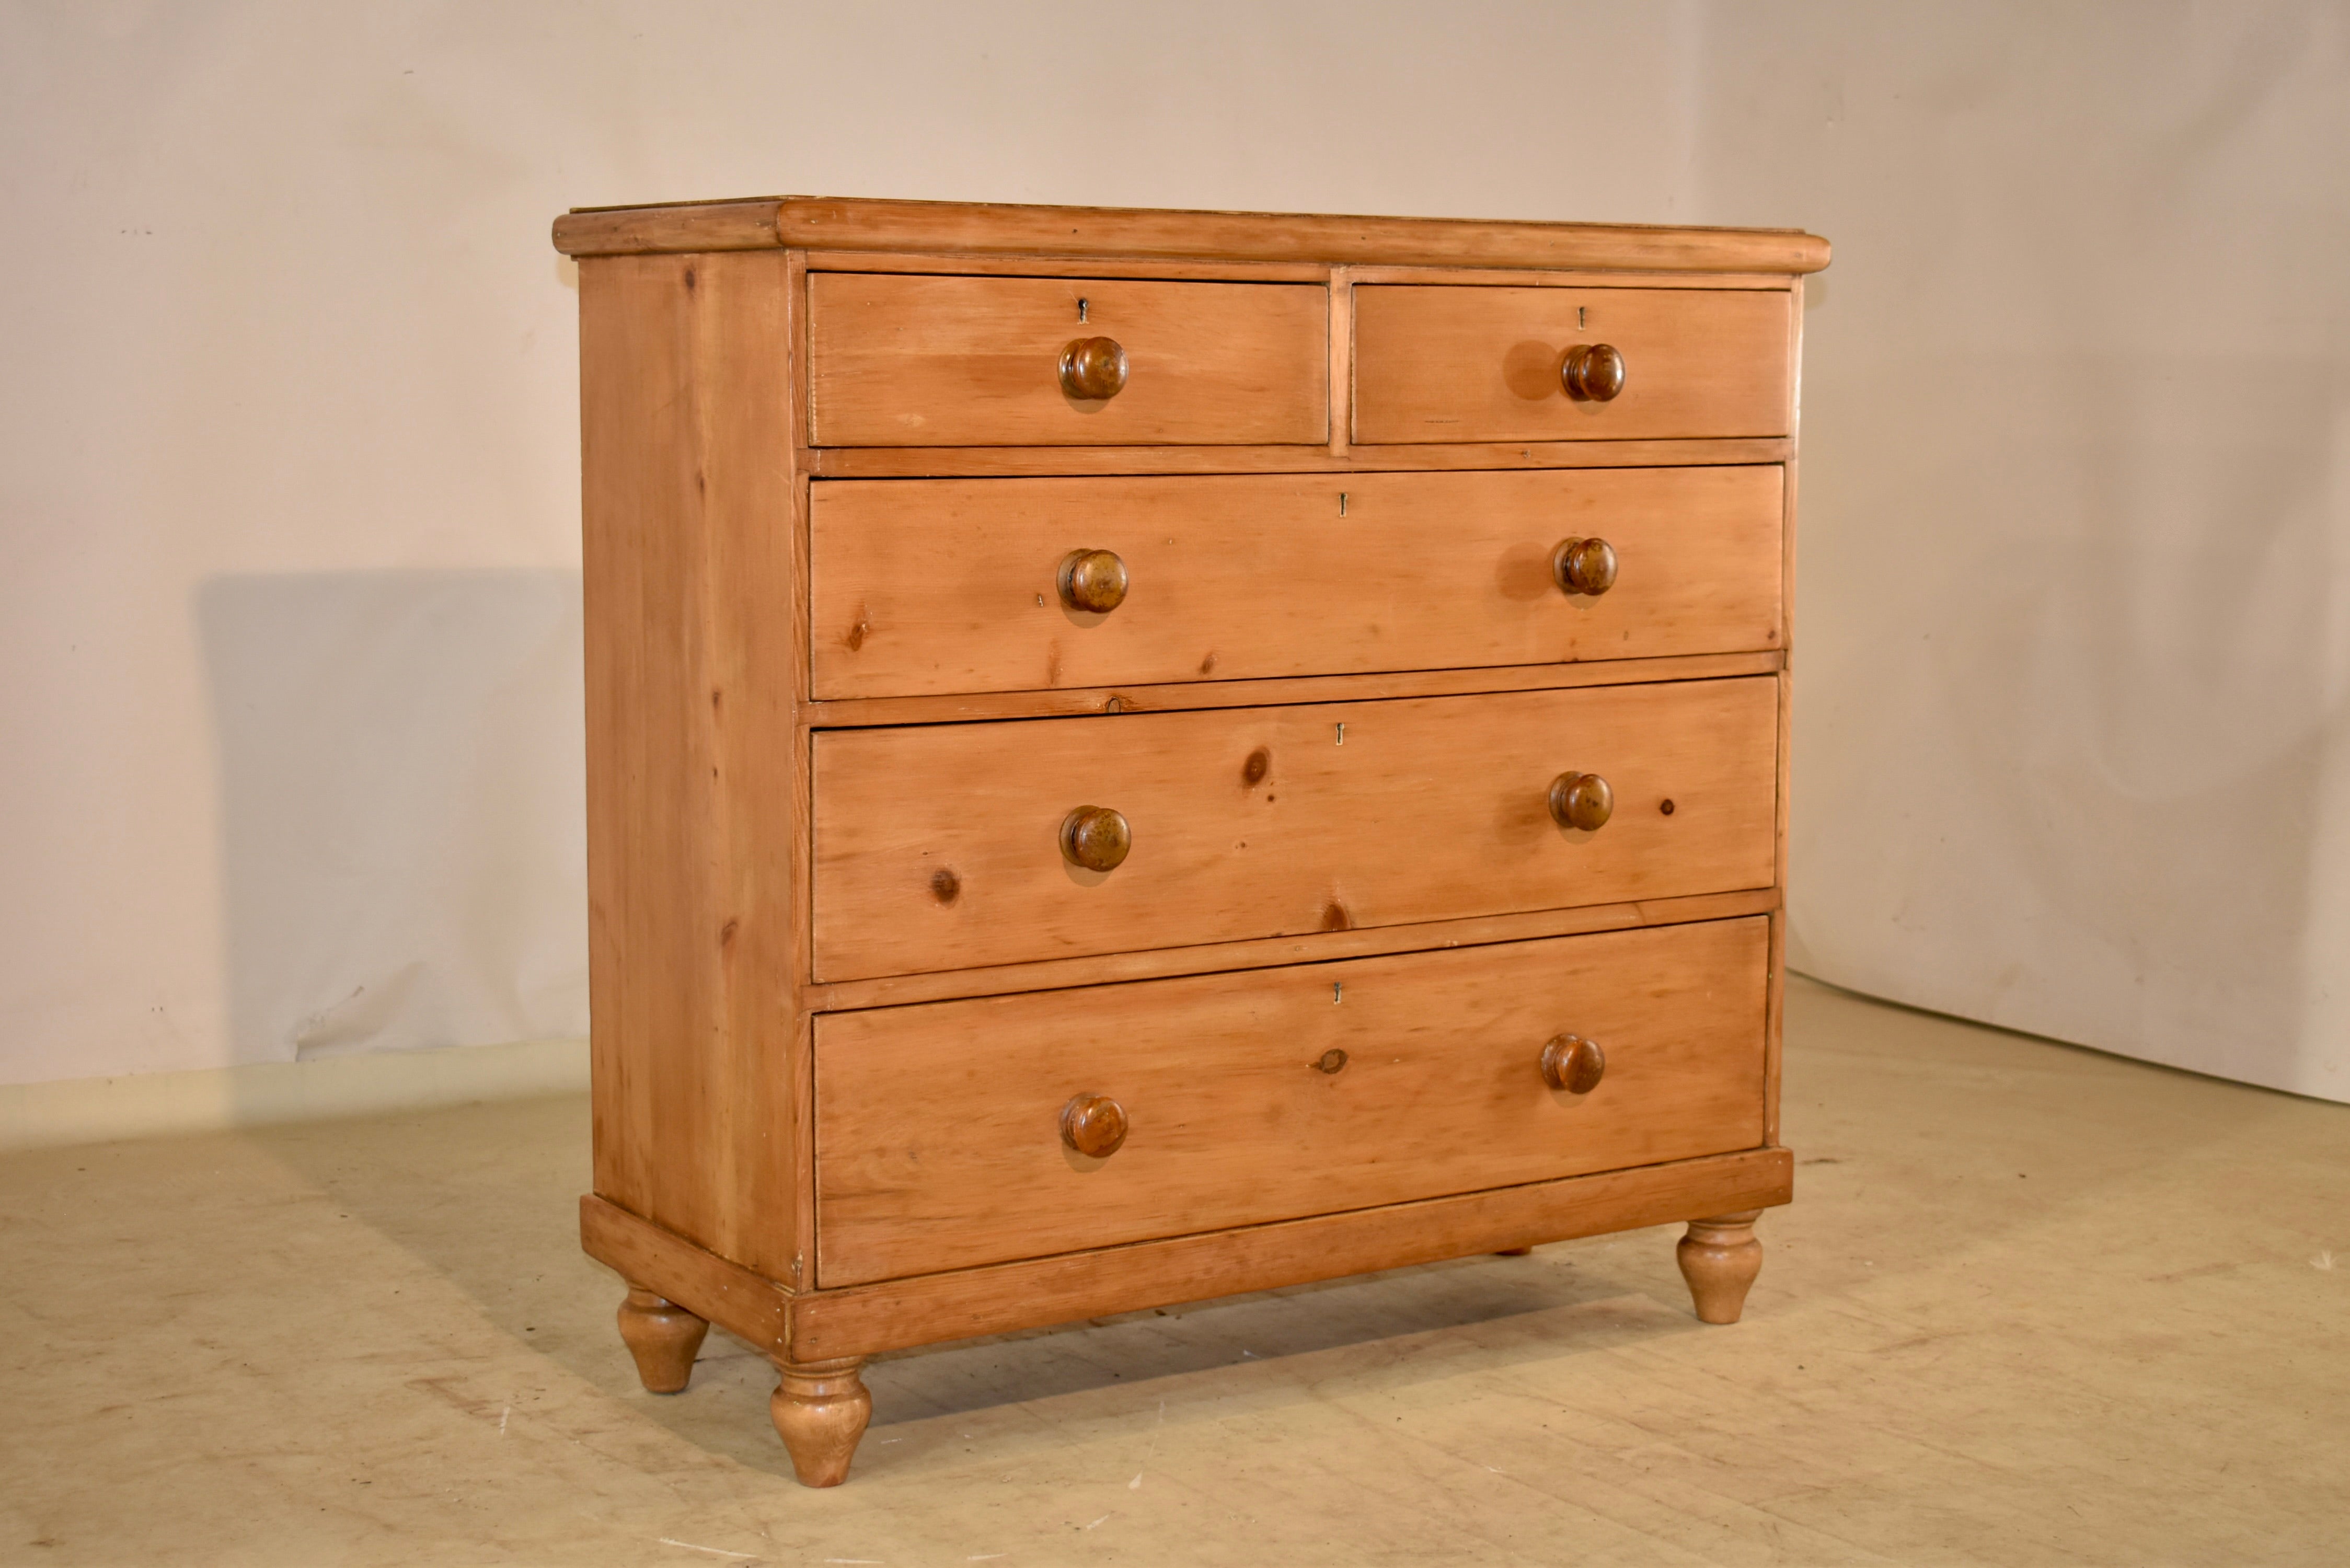 19th Century pine chest of drawers with a single board top surrounded by a molded edge, following down to simple sides. The case has two over three drawers in the front, and the case is supported on hand turned feet. This chest is a very nice size